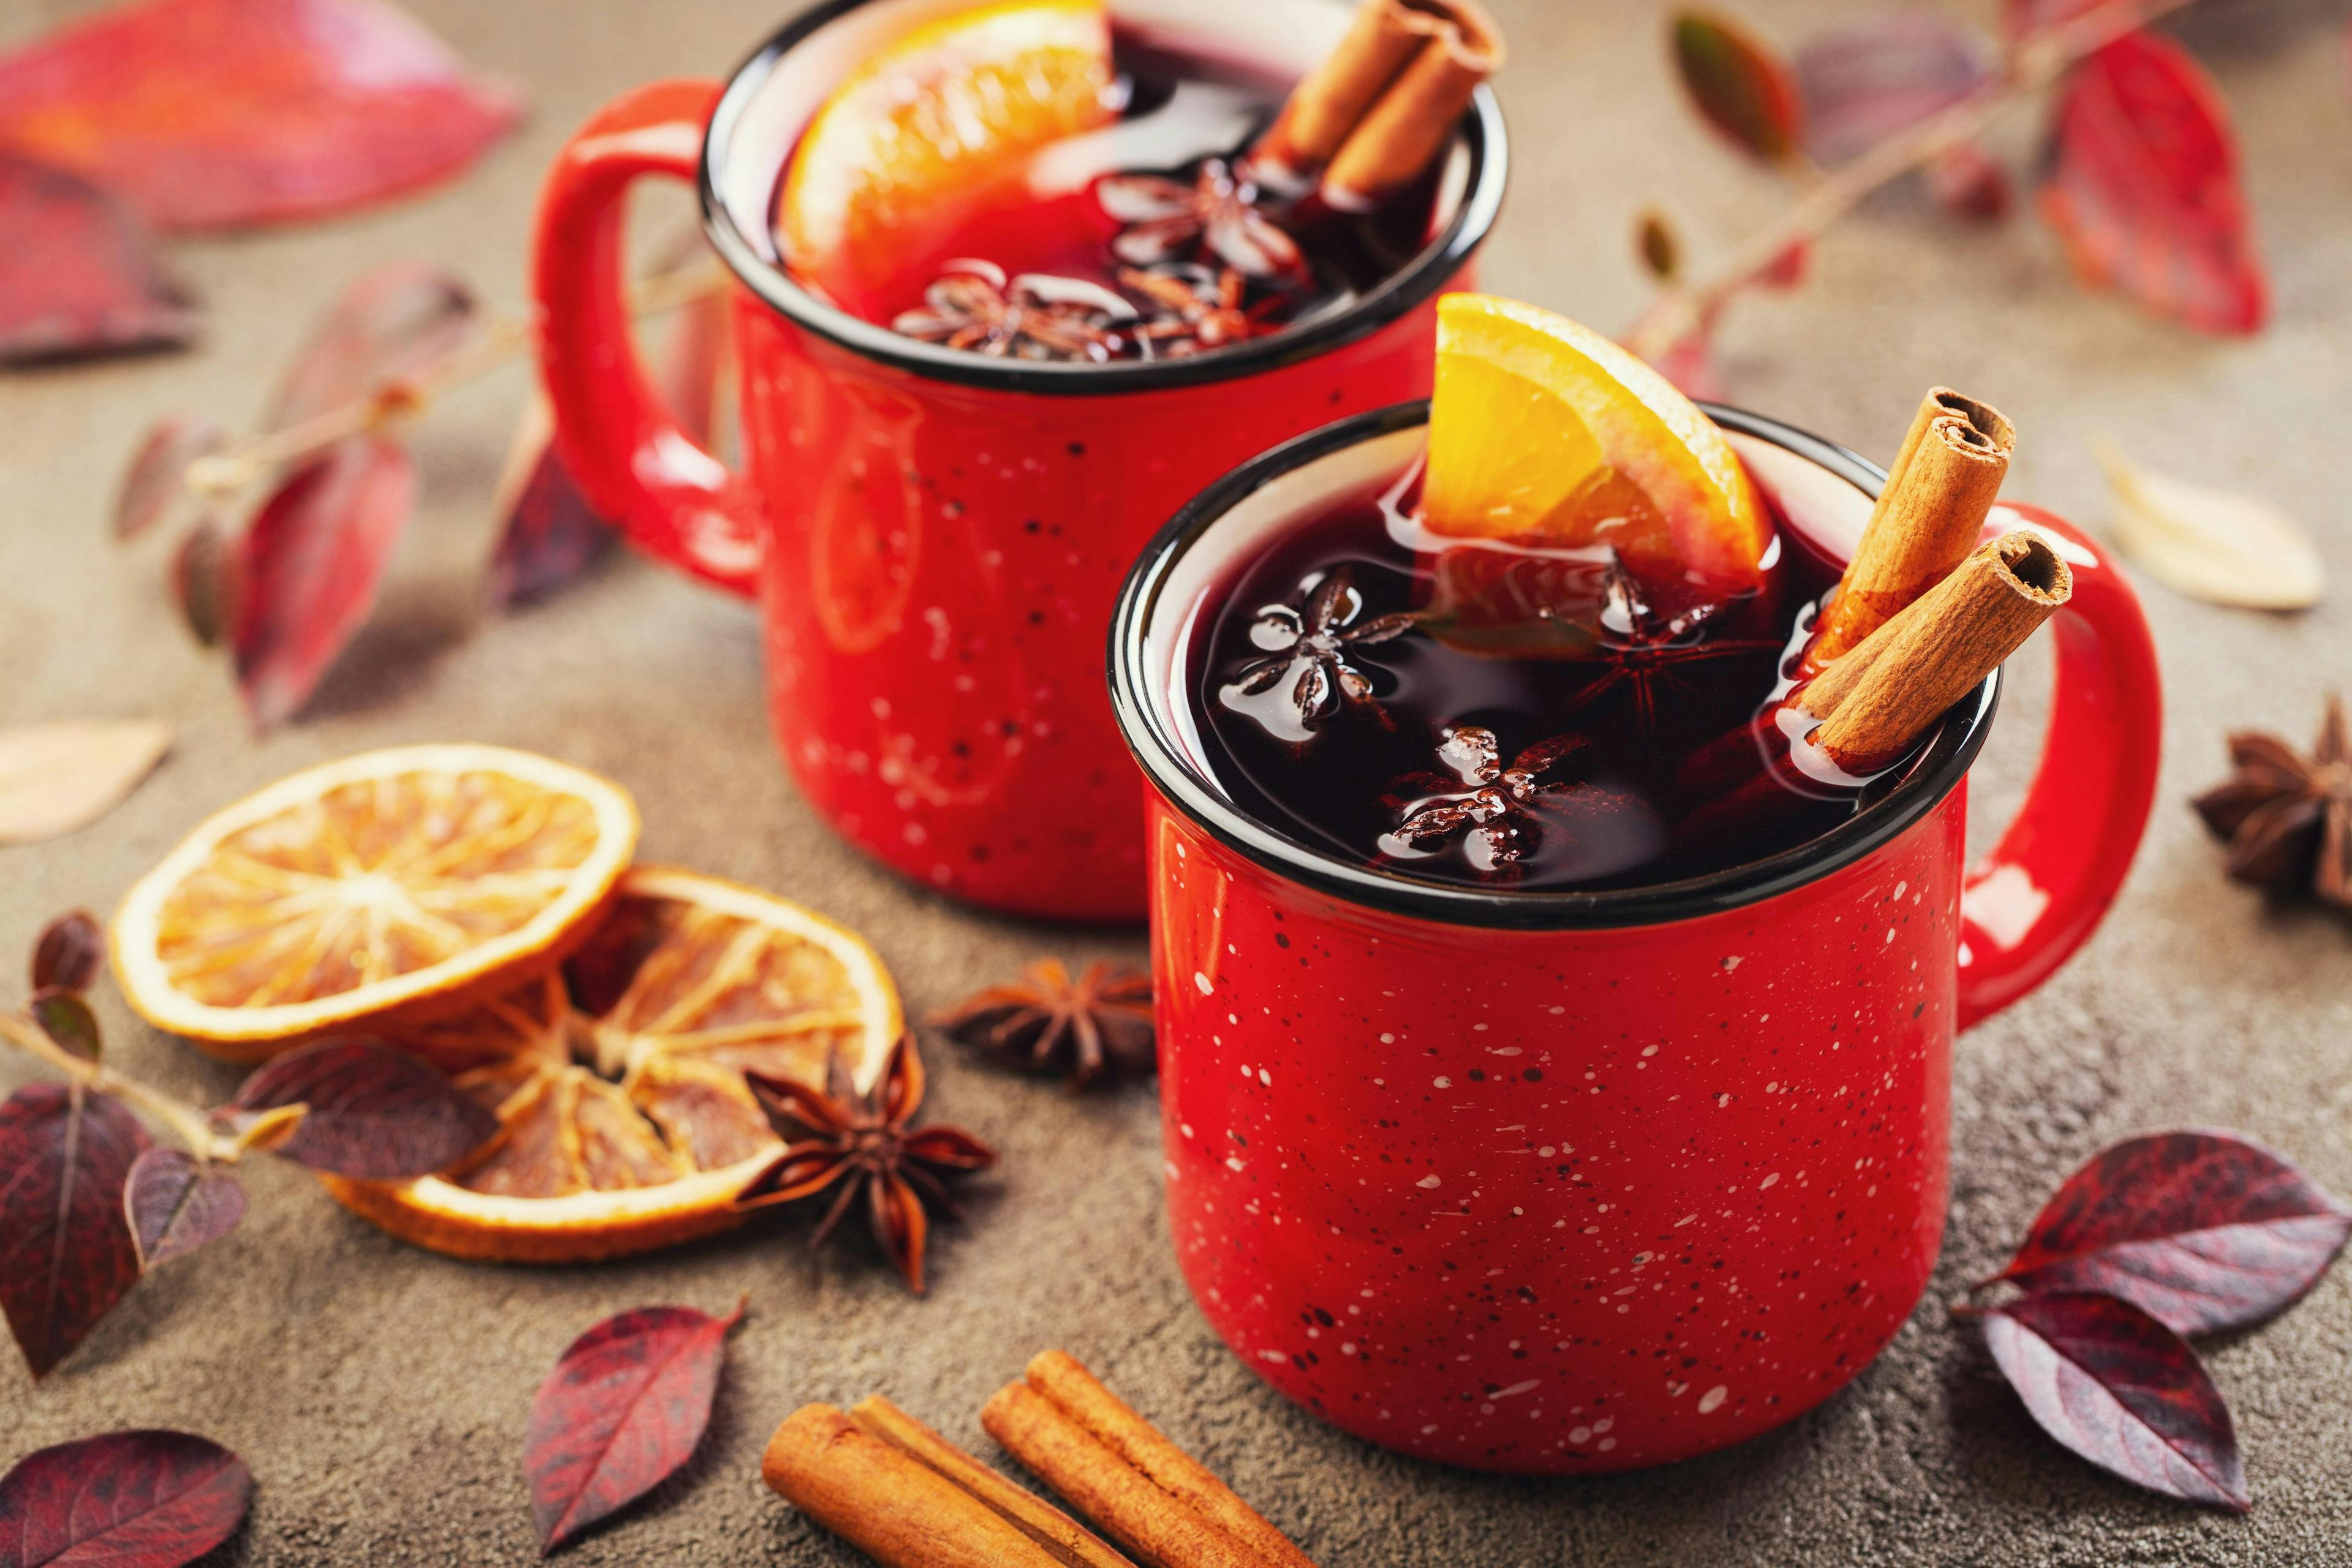 spice,wintertime,fir,red,leave,above,decoration,alcohol,anise,warmth,overhead,tree,aromatic,drink,celebration,sticks,background,vintage,autumn,card,mug,wine,cup,cinnamon,fruit,recipe,winter,hot,holiday,two,punch,rustic,glogg,cocktail,beverage,kitchen,table,garland,mulled,star,advent,festive,comfort,food,lifestyle,stone,orange,dessert,gluhwein,evening cup